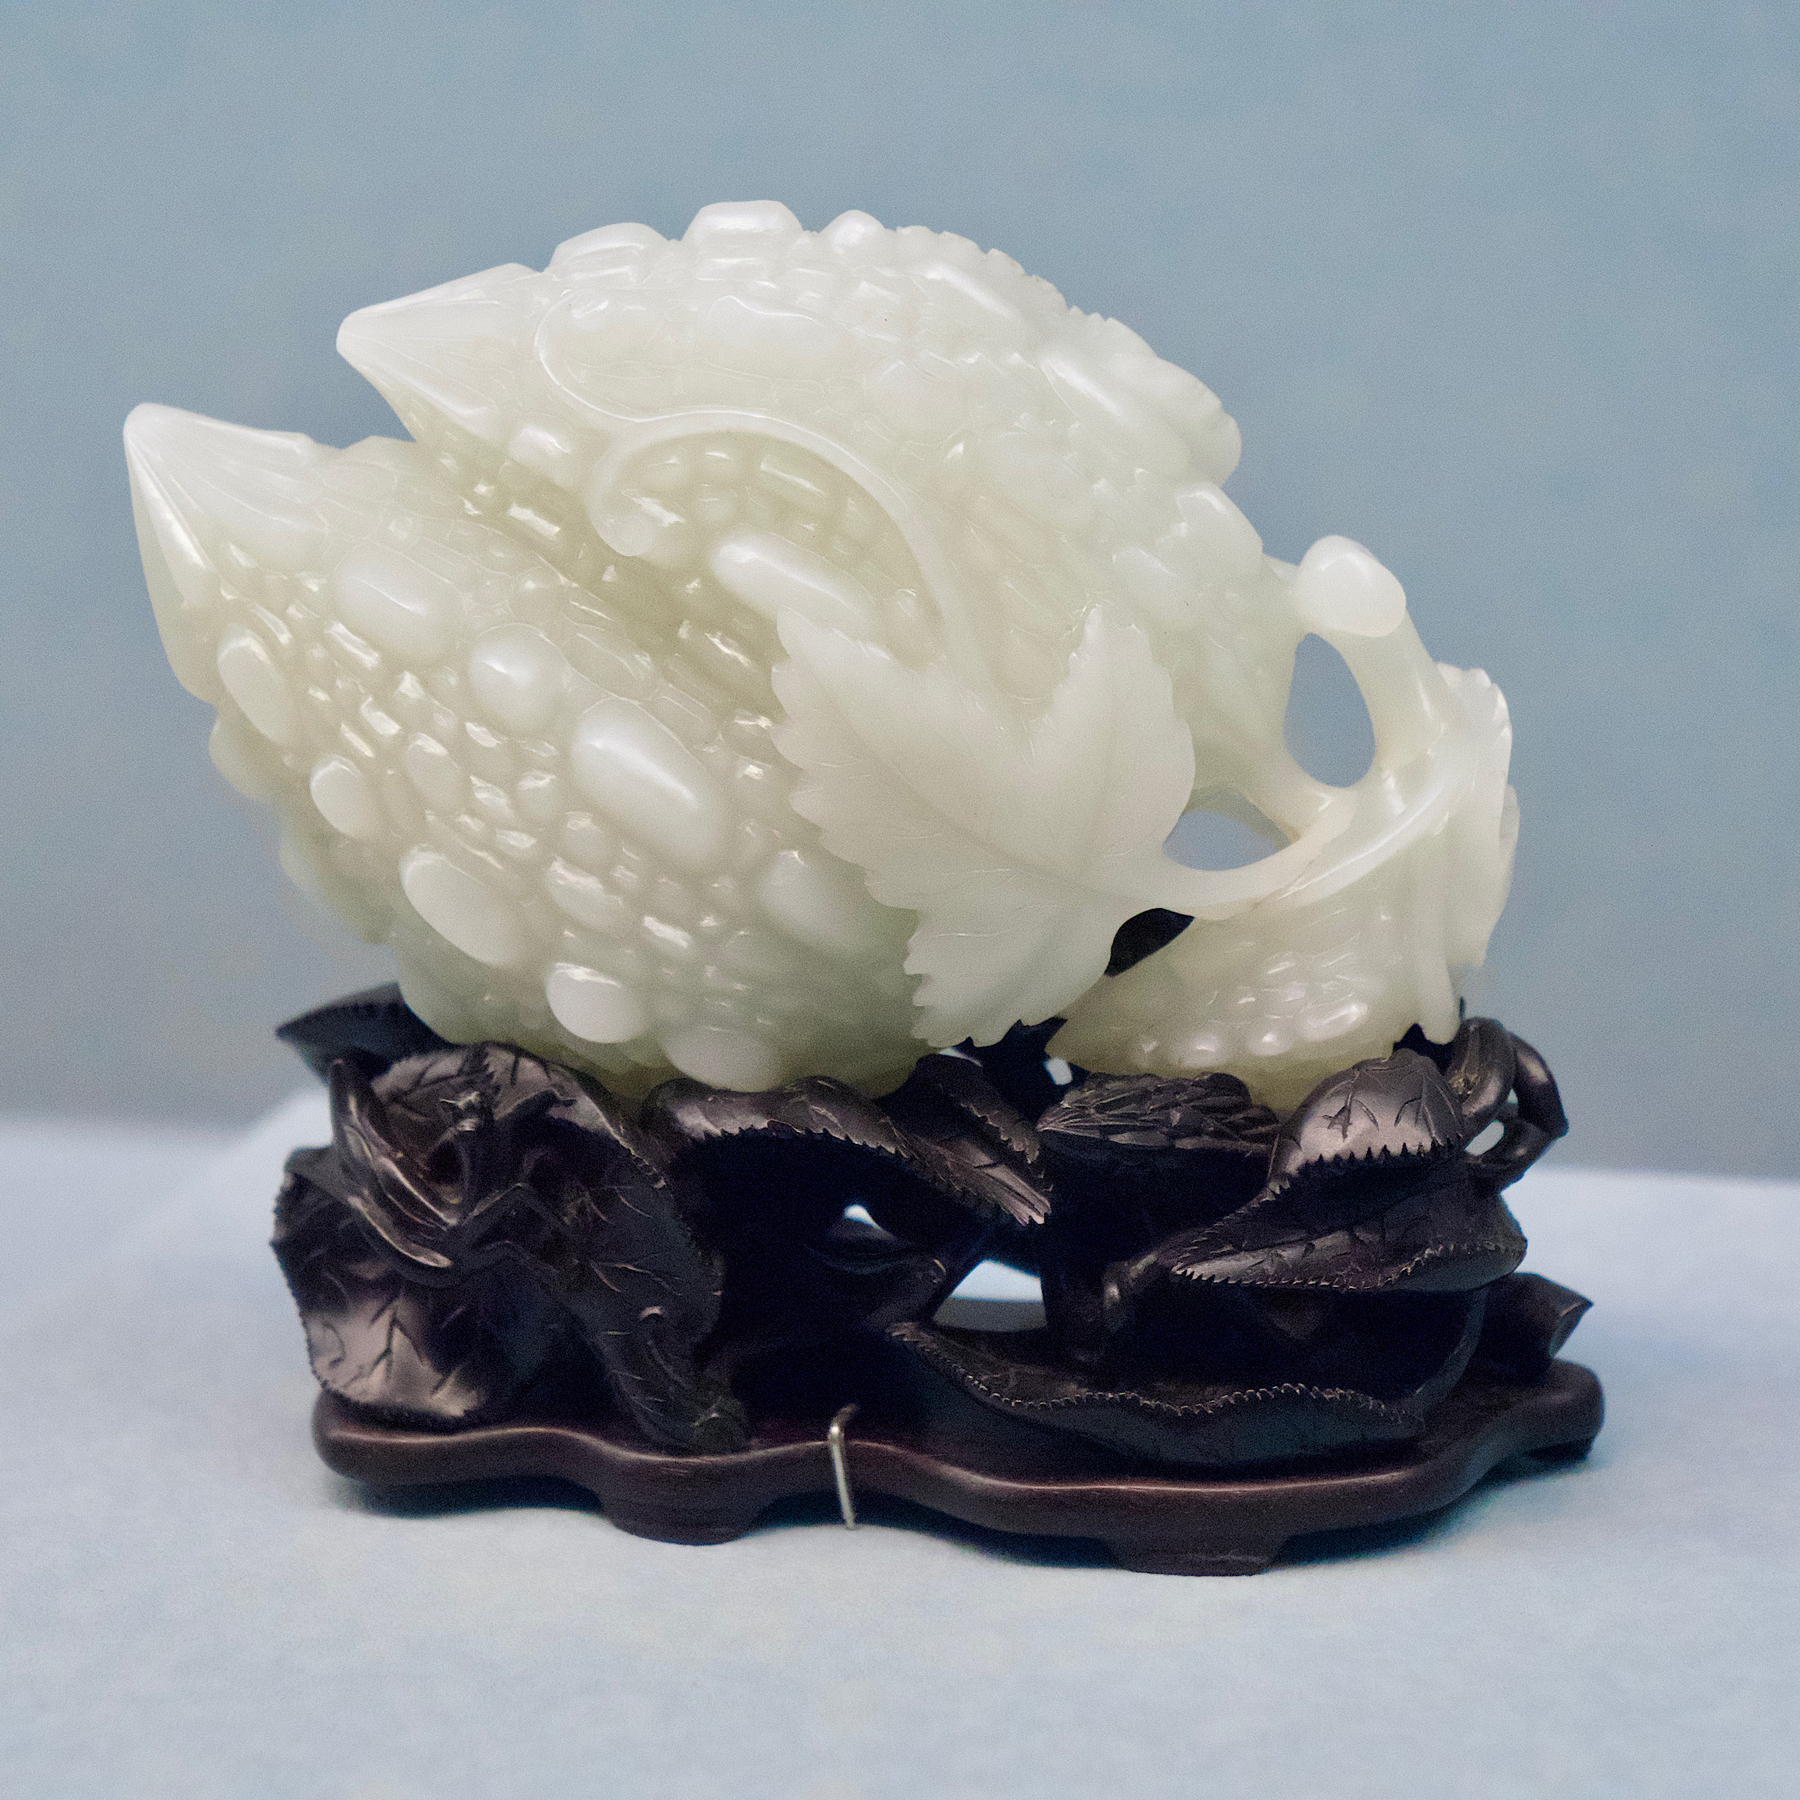 A lychee carved from jade